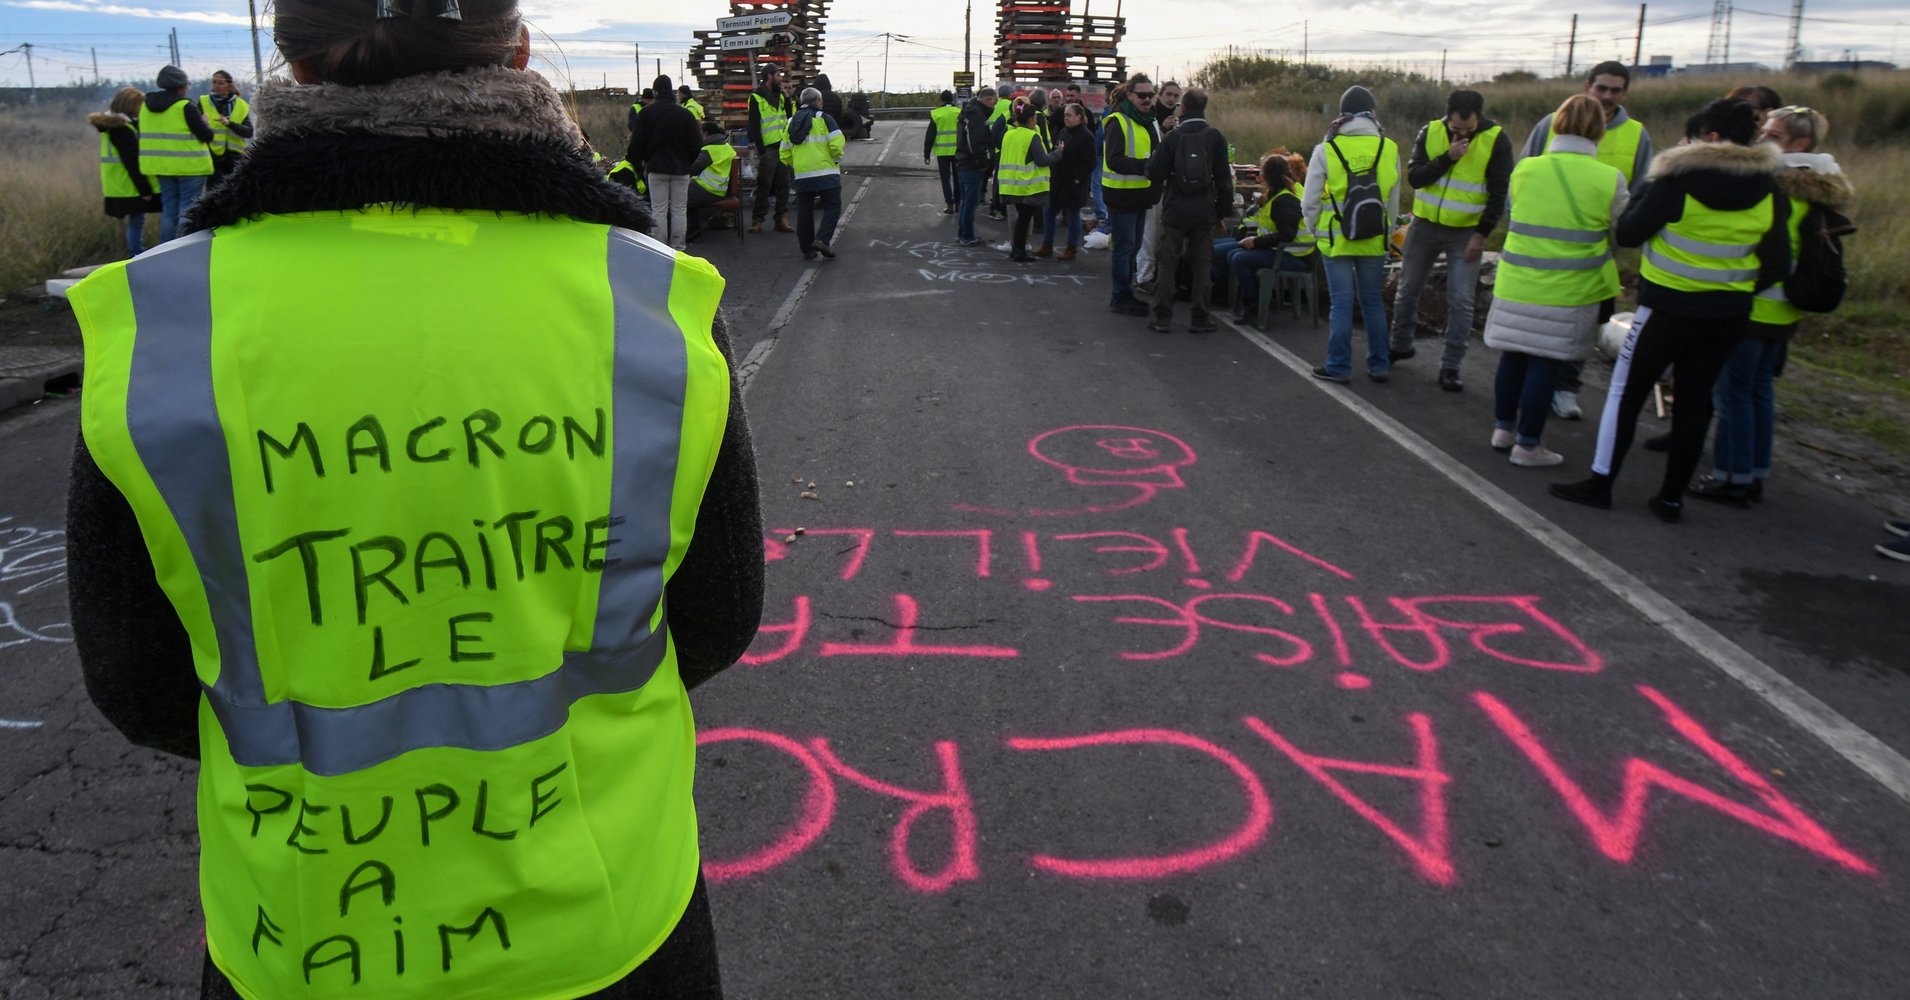  Macron Set To Suspend Fuel Tax Increase To End French 'Yellow Vest' Protests